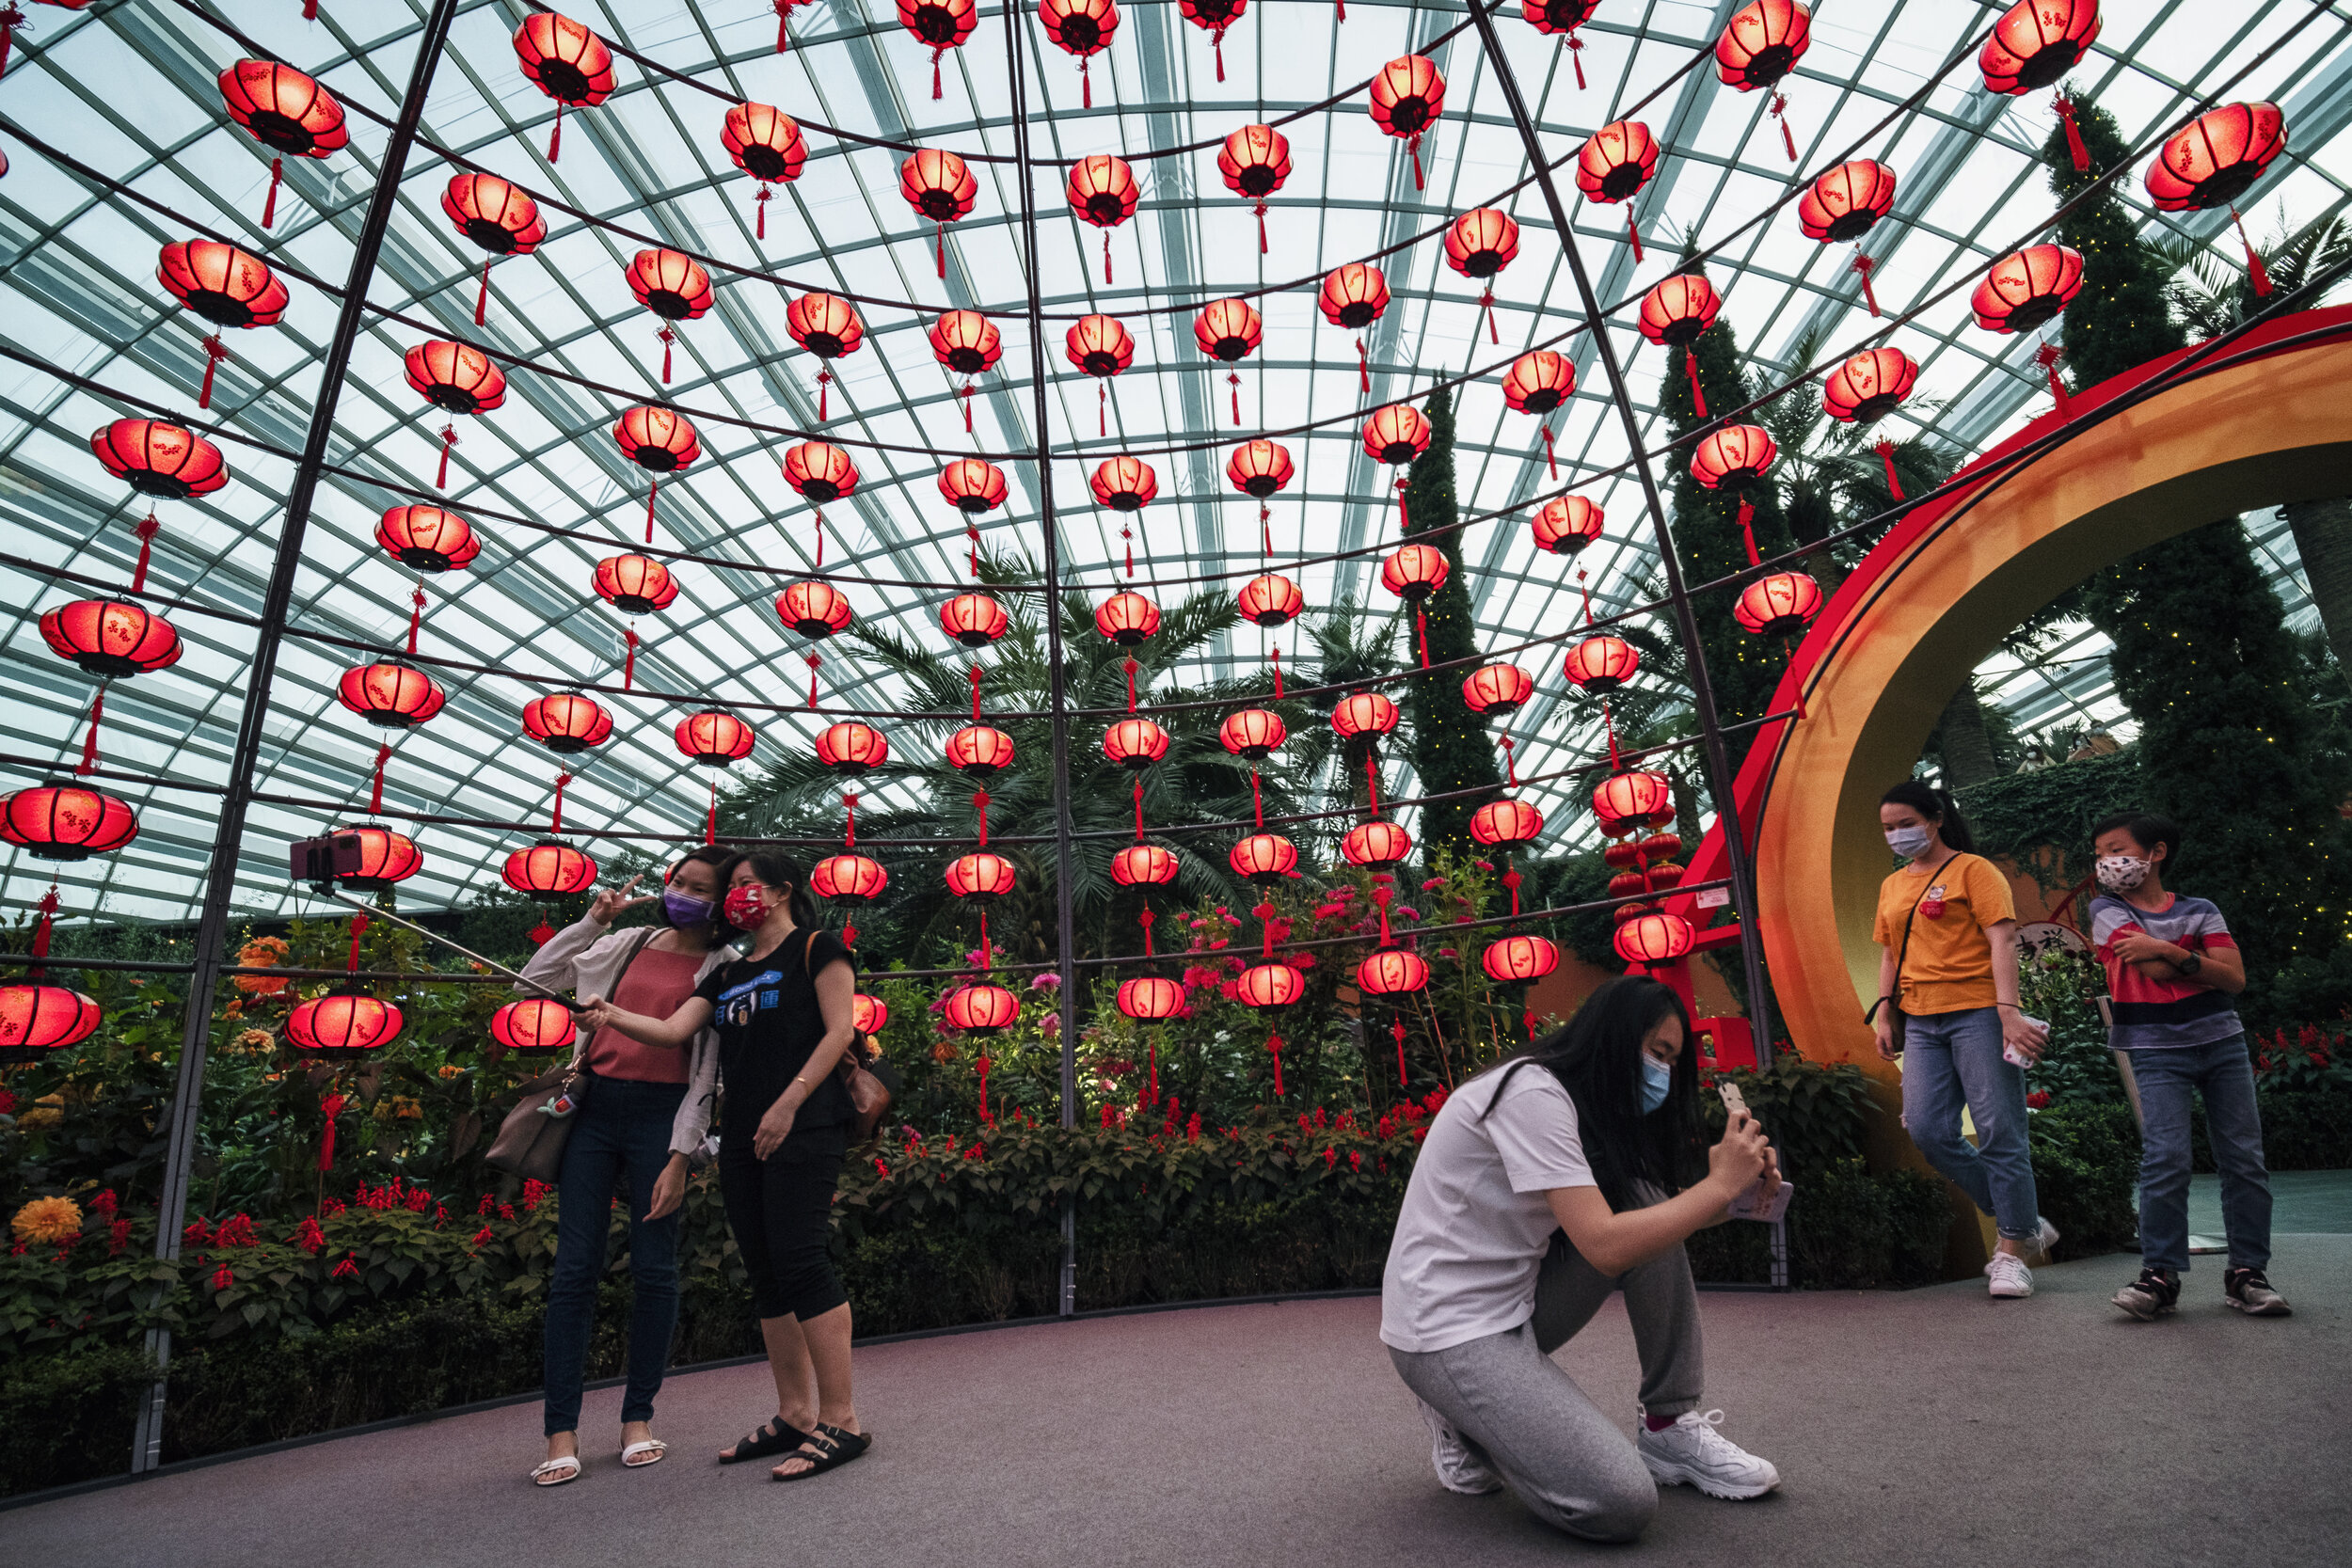  Visitors take pictures during the annual Dahlia Dreams floral display ahead of the Chinese Lunar New Year of the Ox, otherwise known as the Spring Festival, at Singapore's Gardens by the Bay, January 31, 2021. REUTERS/Loriene Perera 